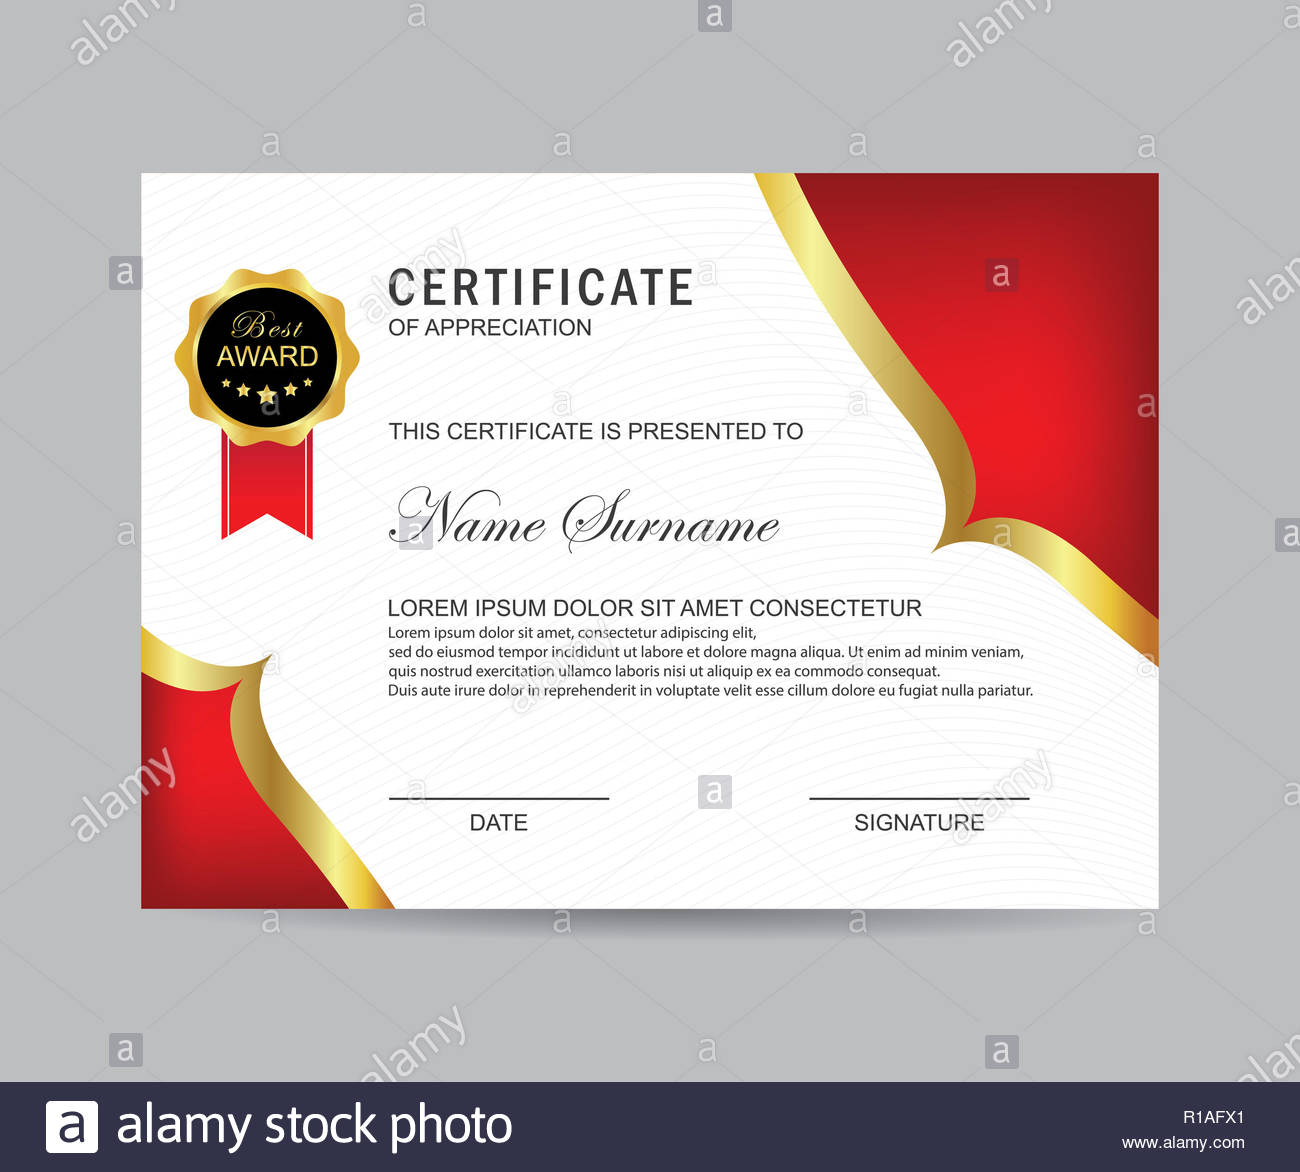 Modern Certificate Template And Background Stock Photo Pertaining To Life Saving Award Certificate Template